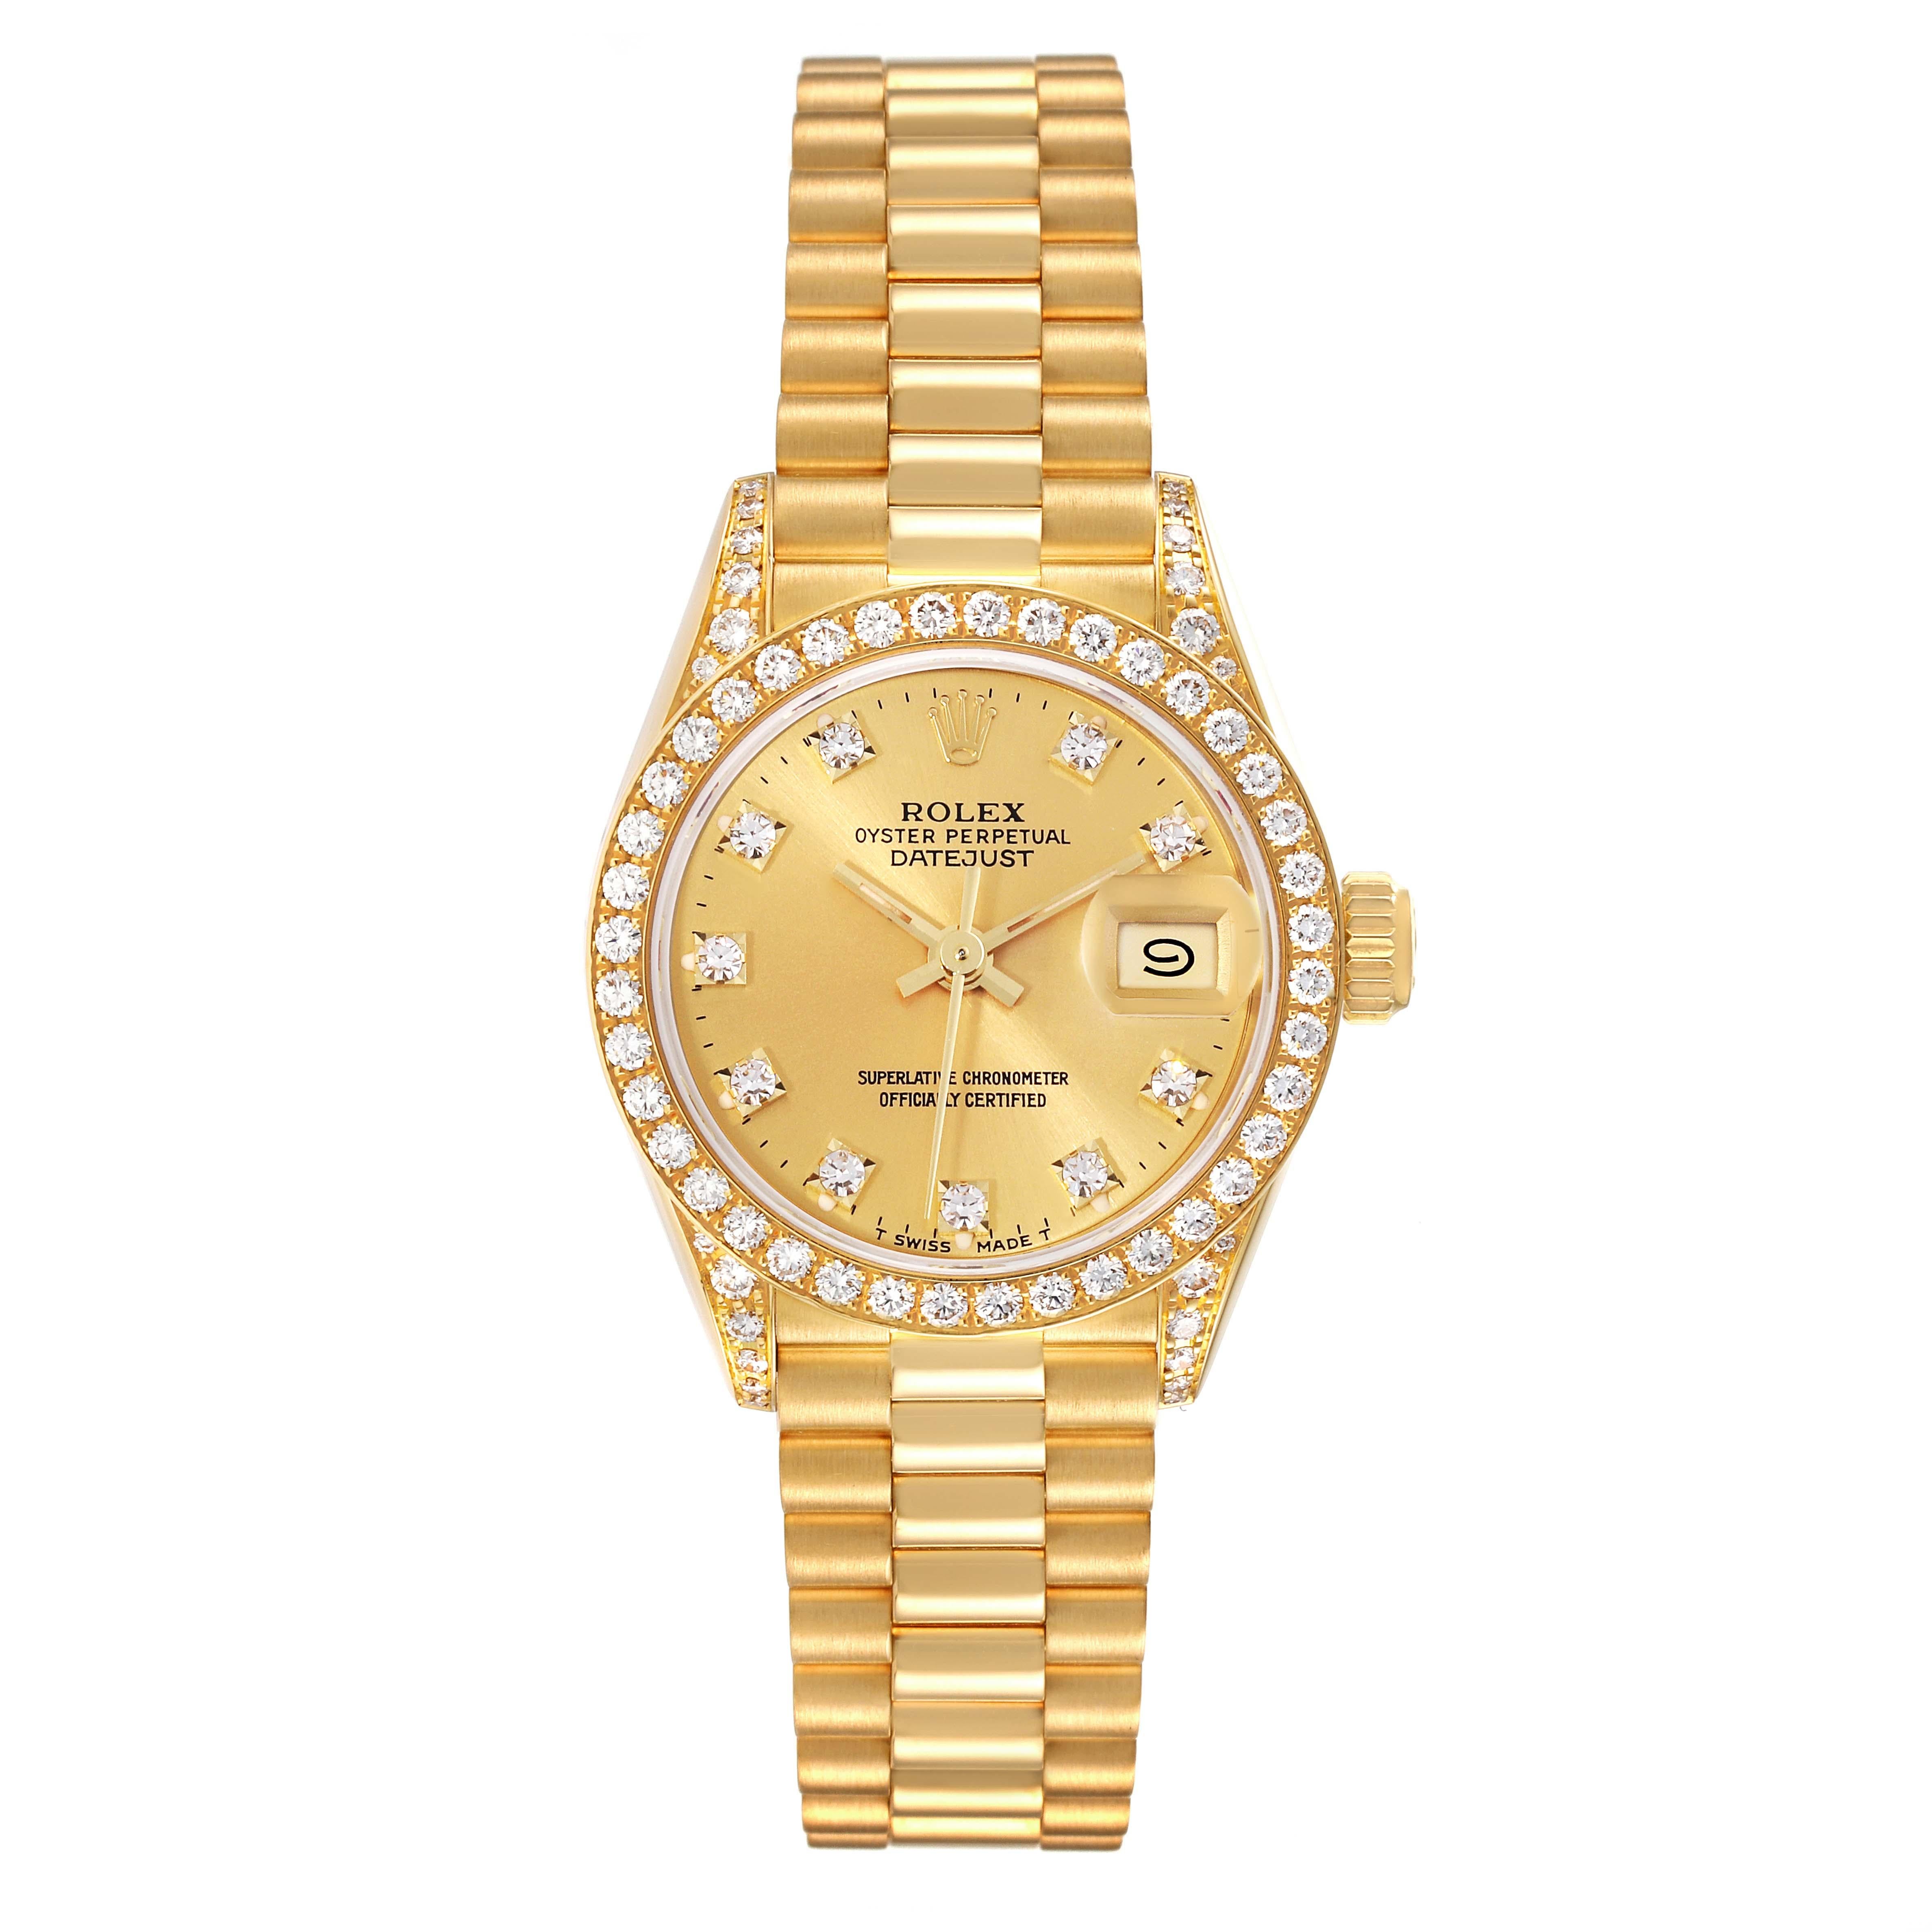 Rolex President Datejust Yellow Gold Diamond Ladies Watch 69158. Officially certified chronometer self-winding movement. 18k yellow gold oyster case 26.0 mm in diameter. Rolex logo on a crown. Original Rolex factory diamond lugs. Original Rolex 18k